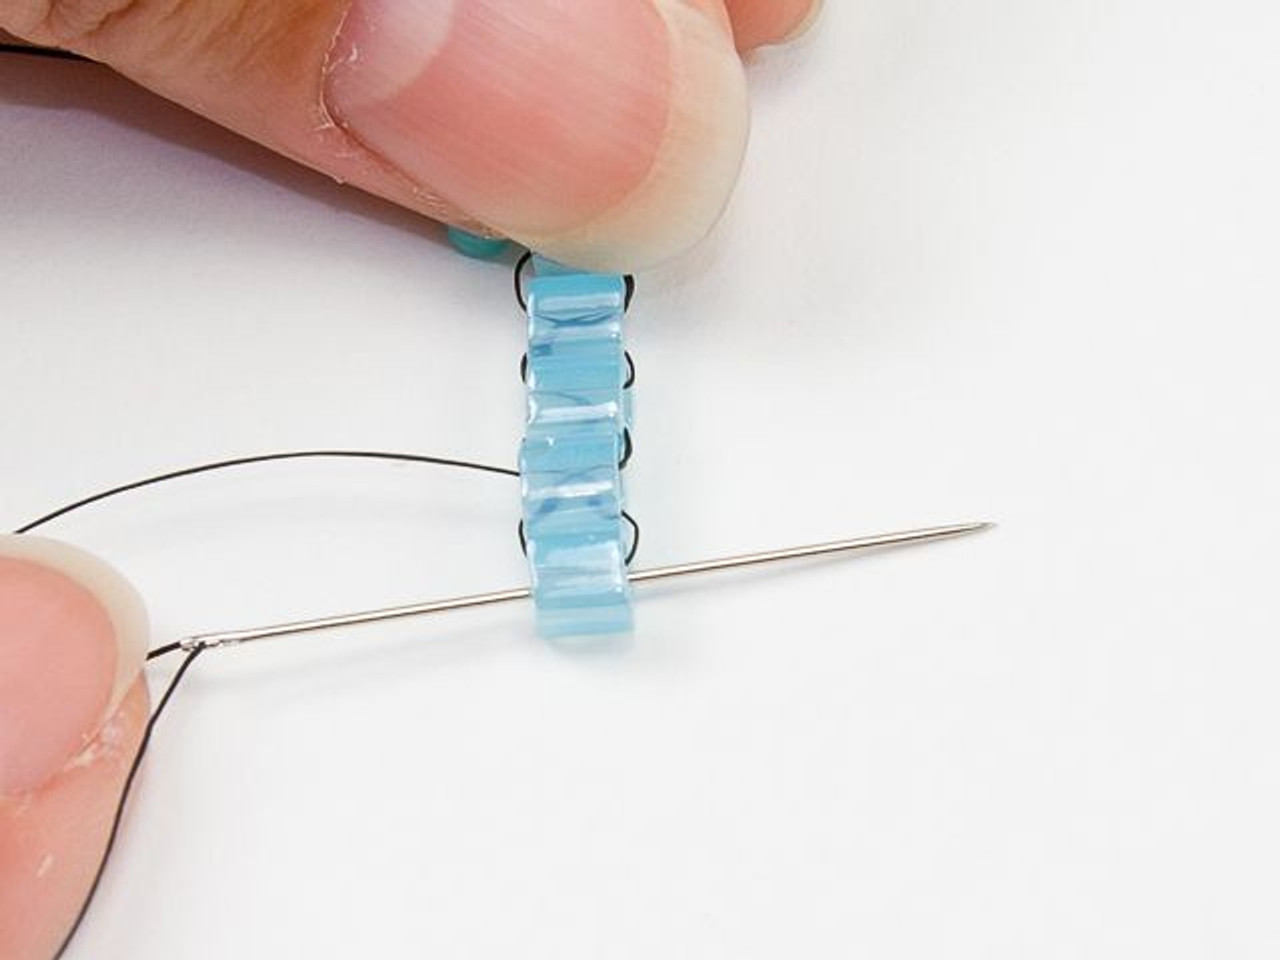 How to string beads on thread - SewGuide